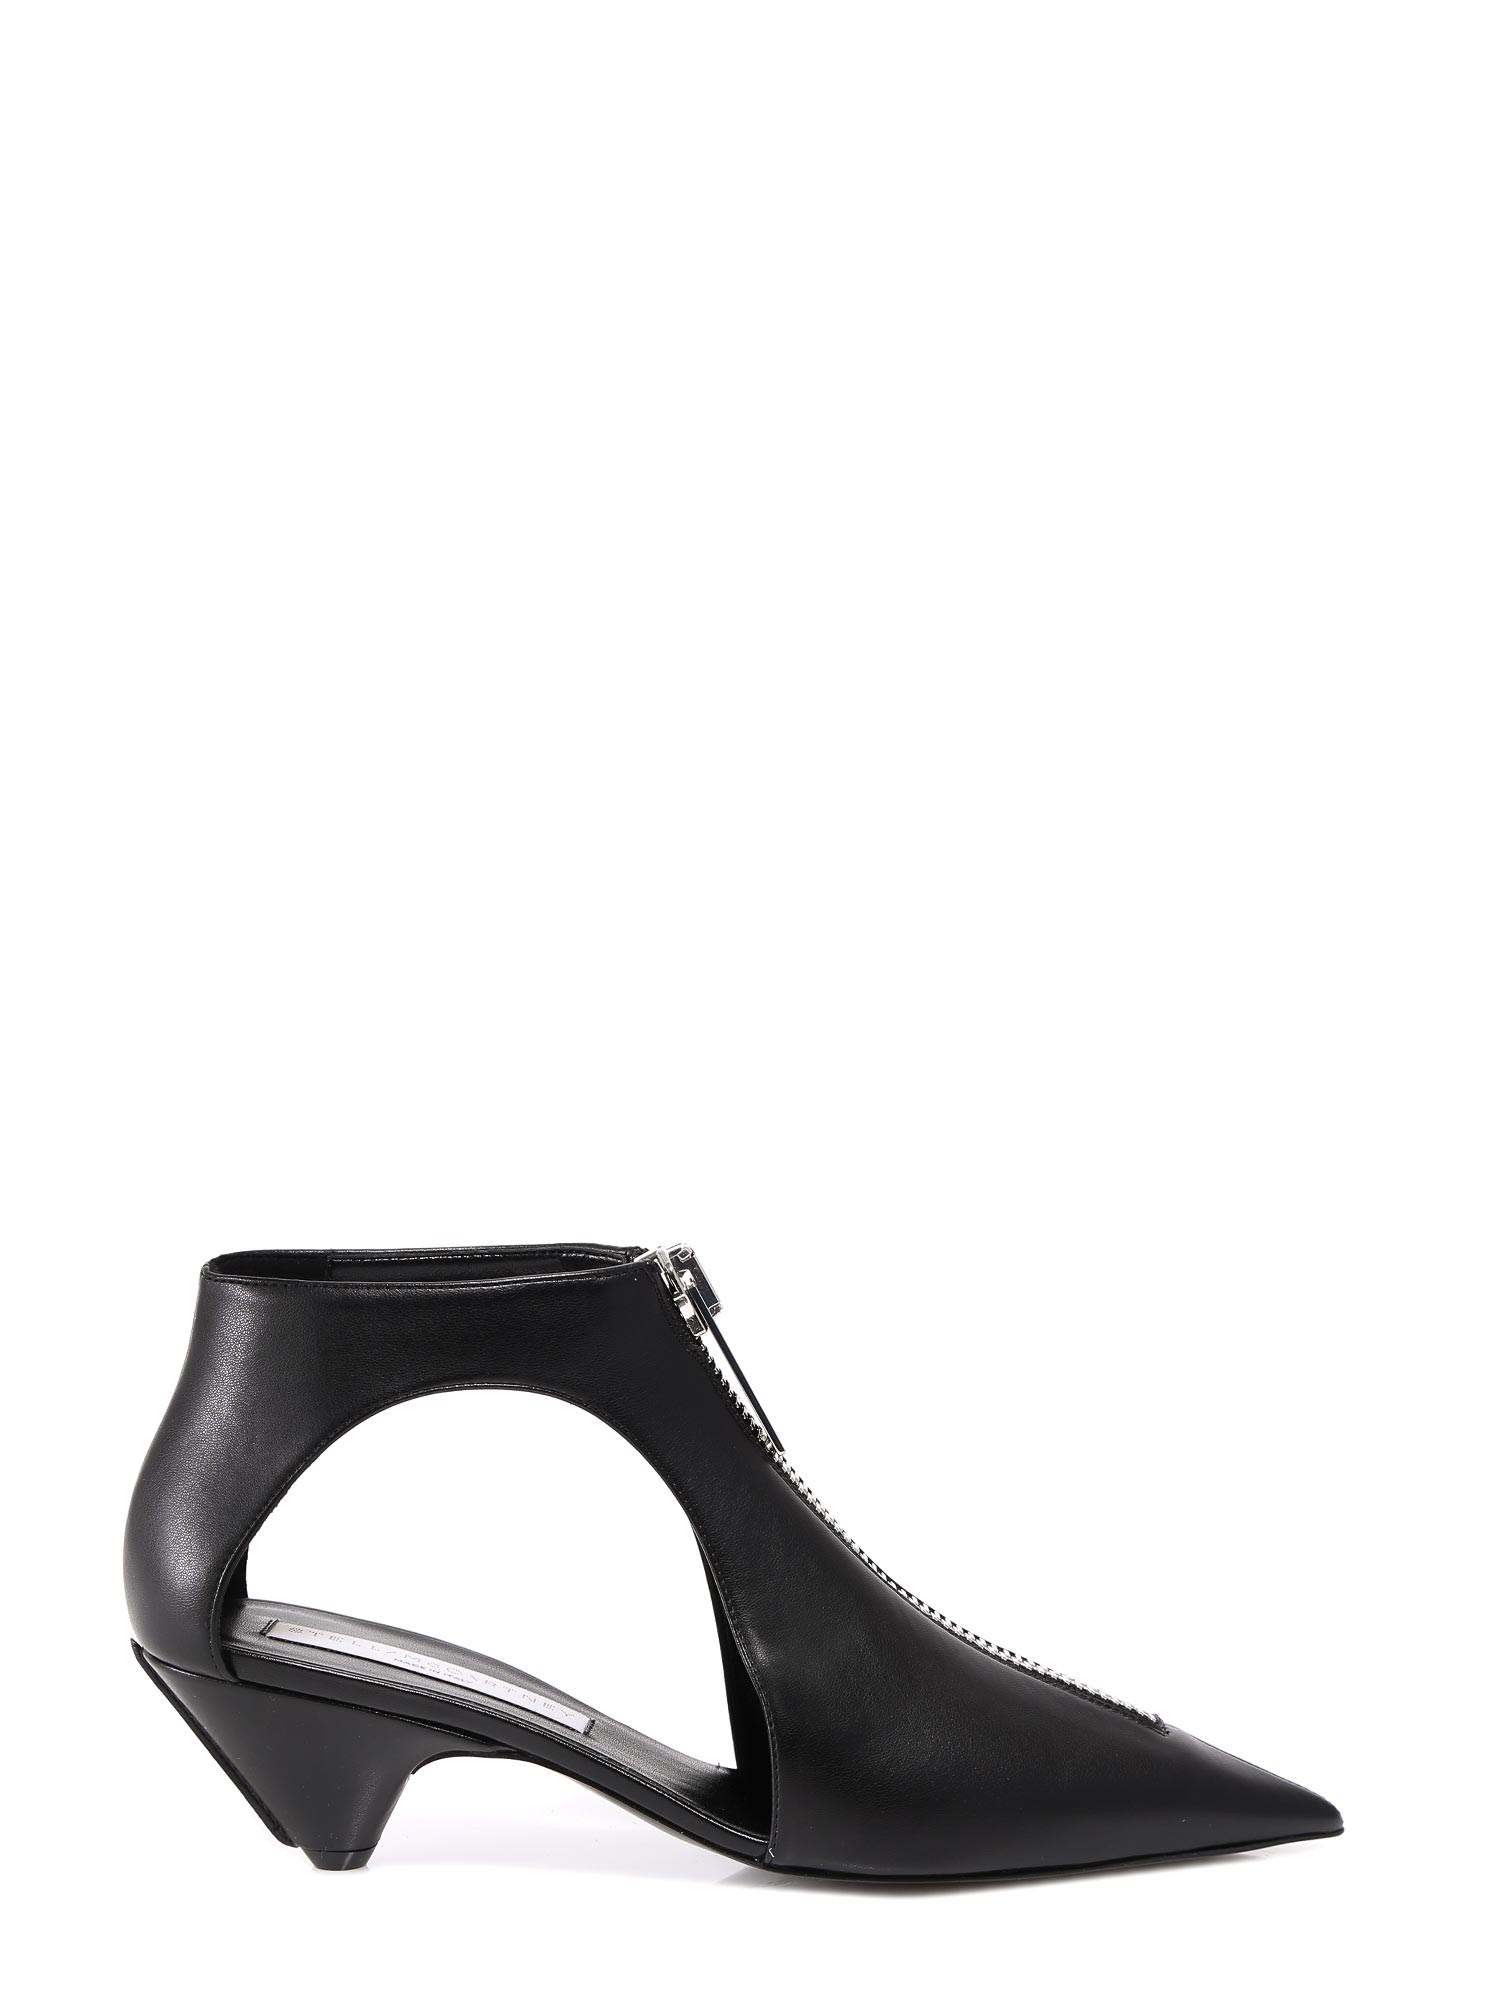 Buy Stella McCartney Boots online, shop Stella McCartney shoes with free shipping